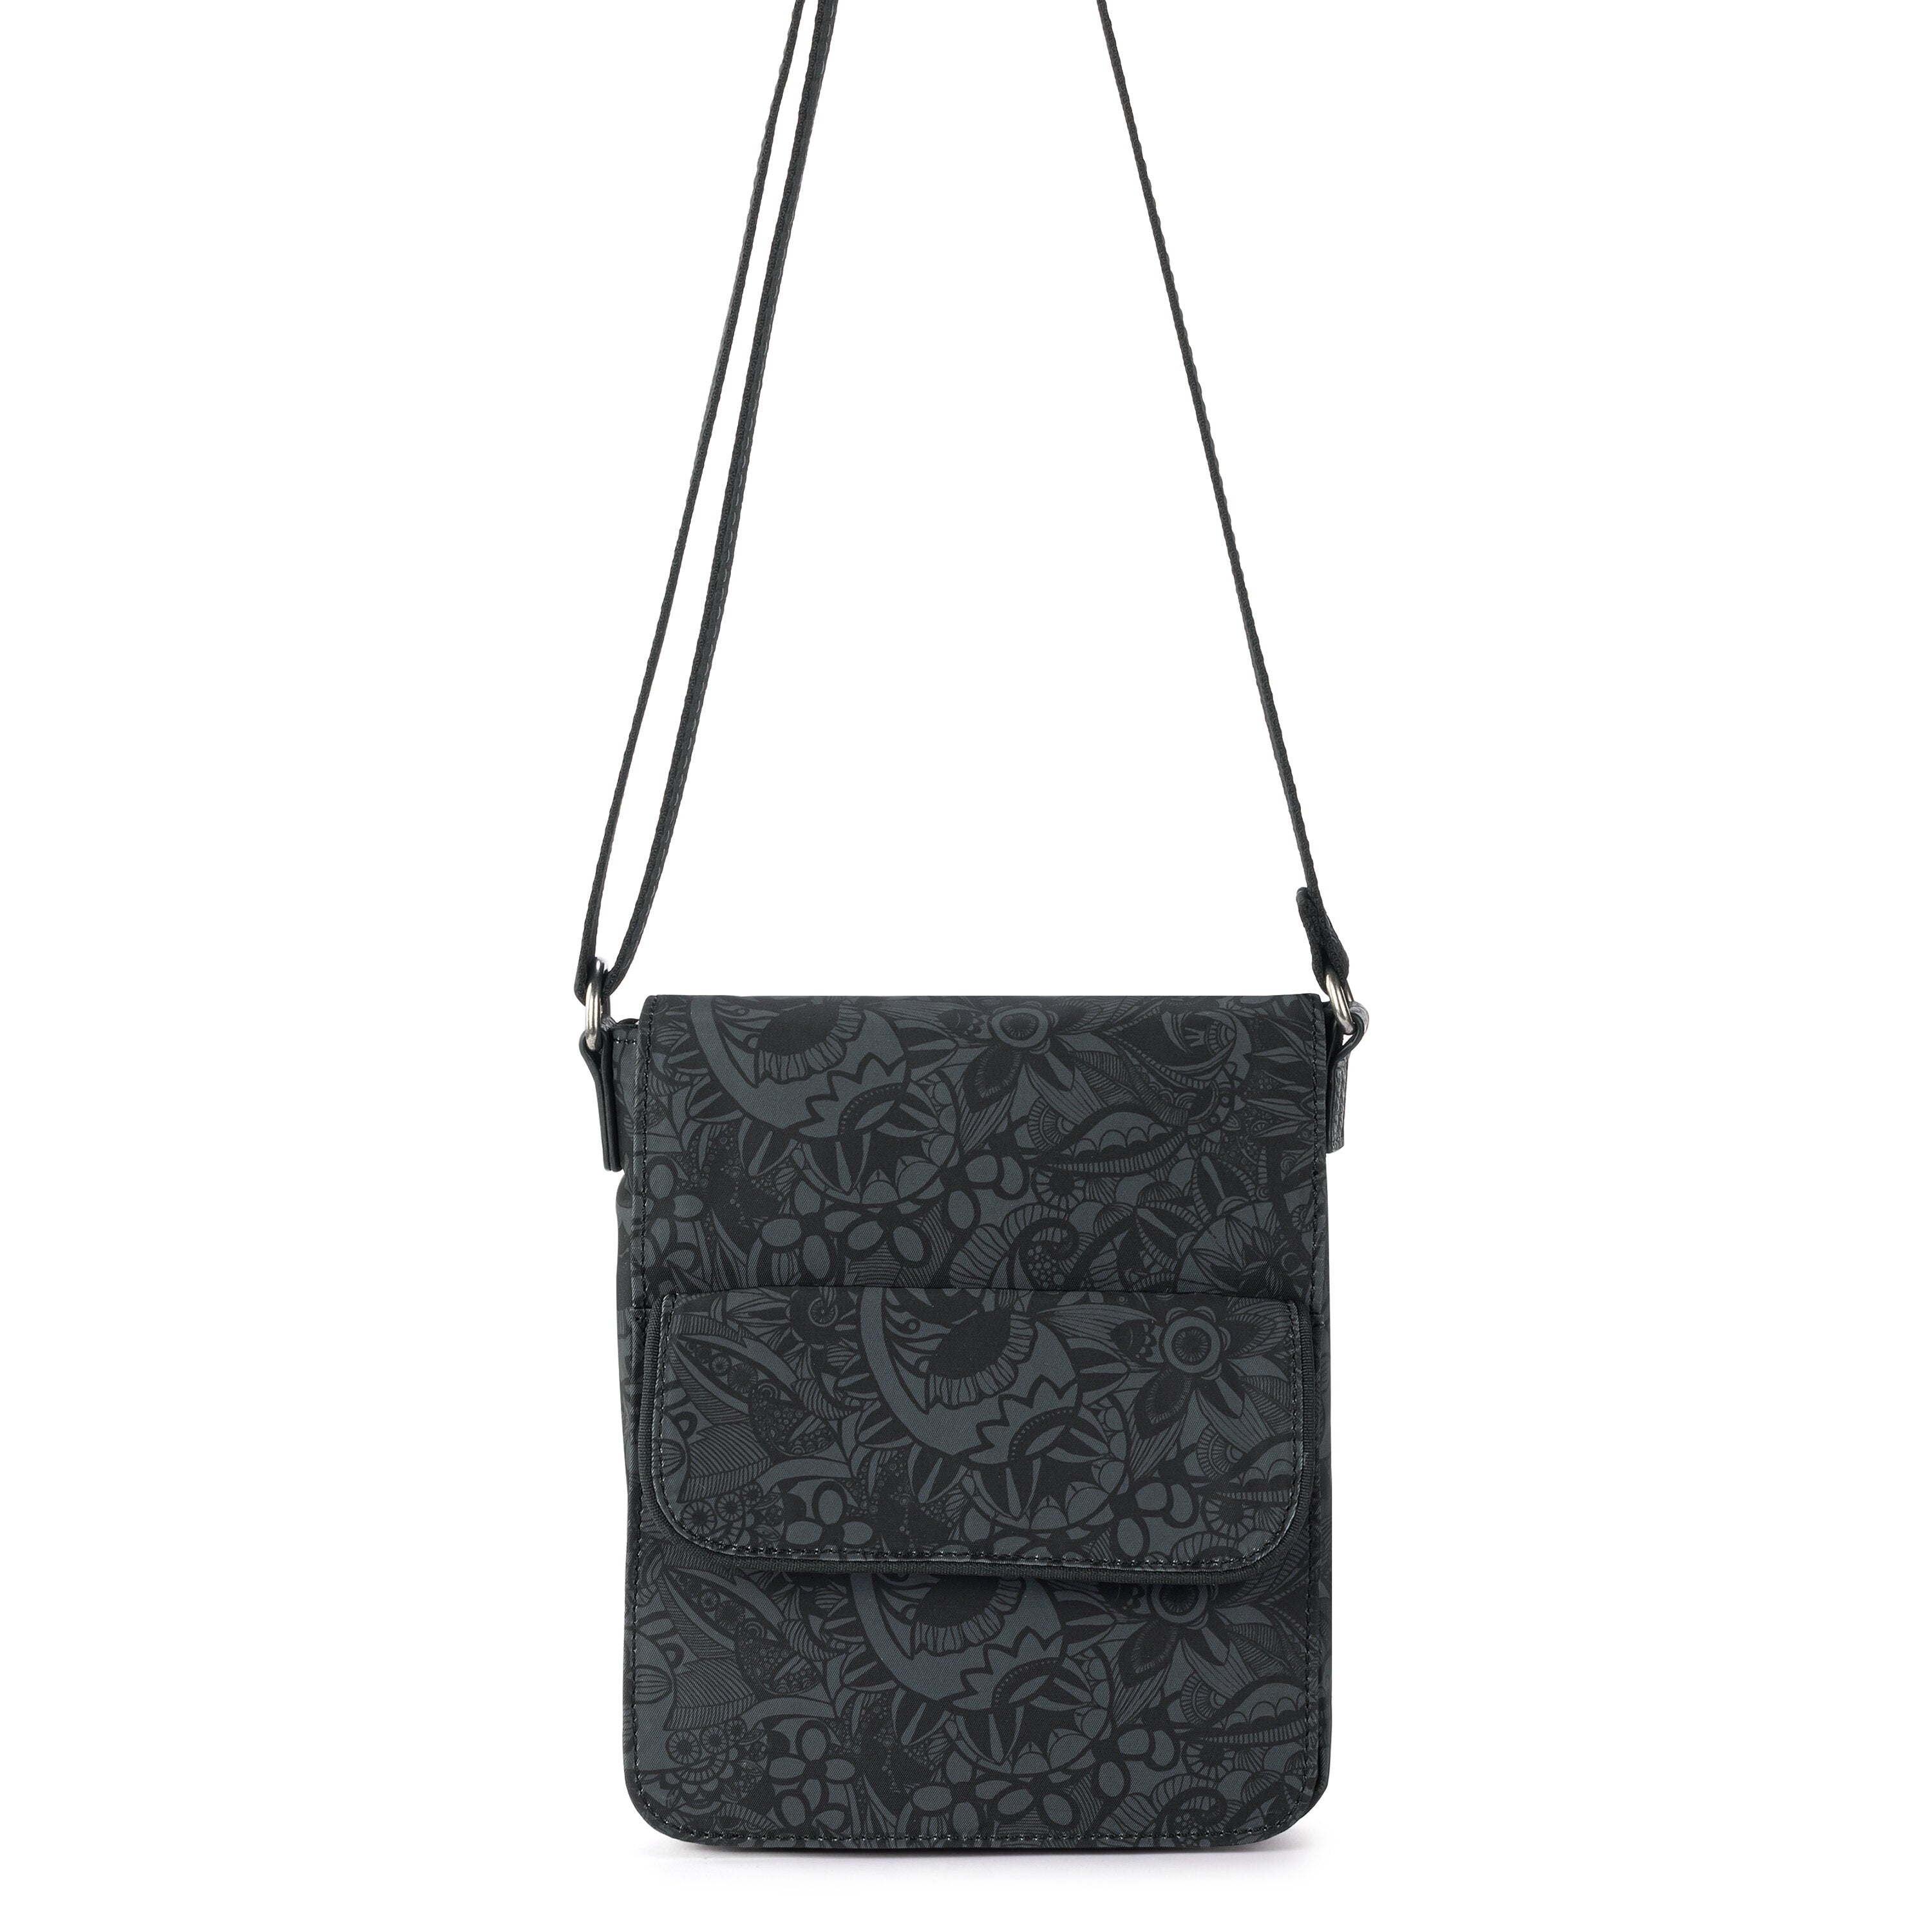 Sakroots On The Go Small Flap Messenger Crossbody Bag